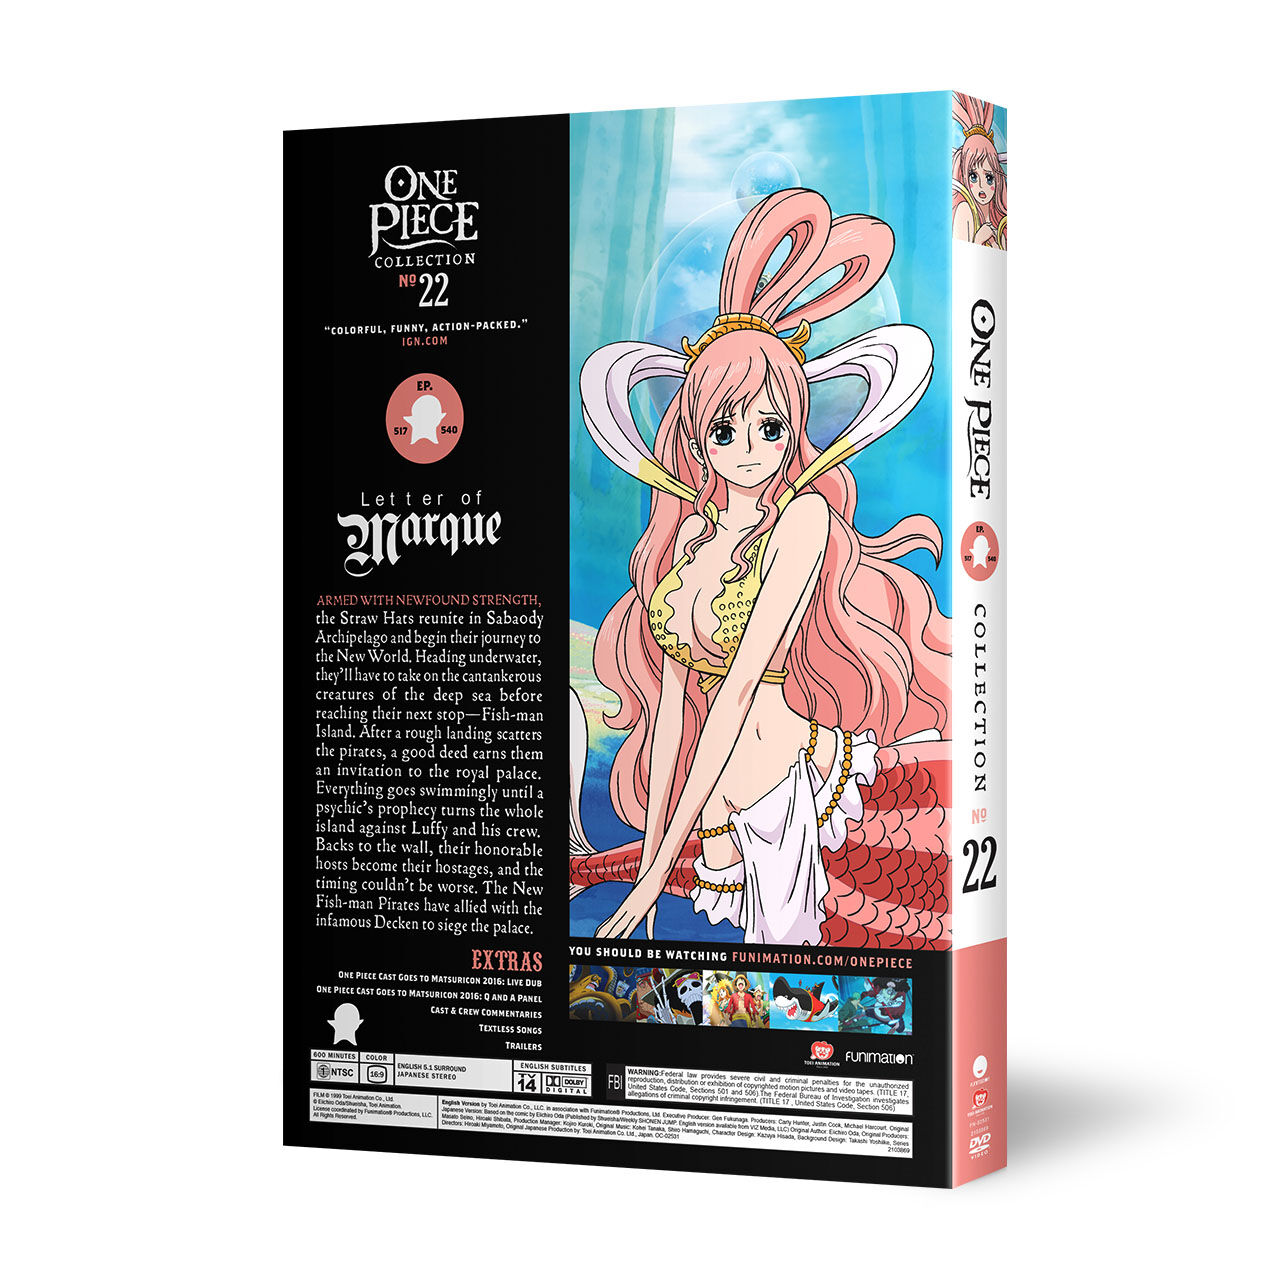 One Piece - Collection 22 - DVD | Crunchyroll Store